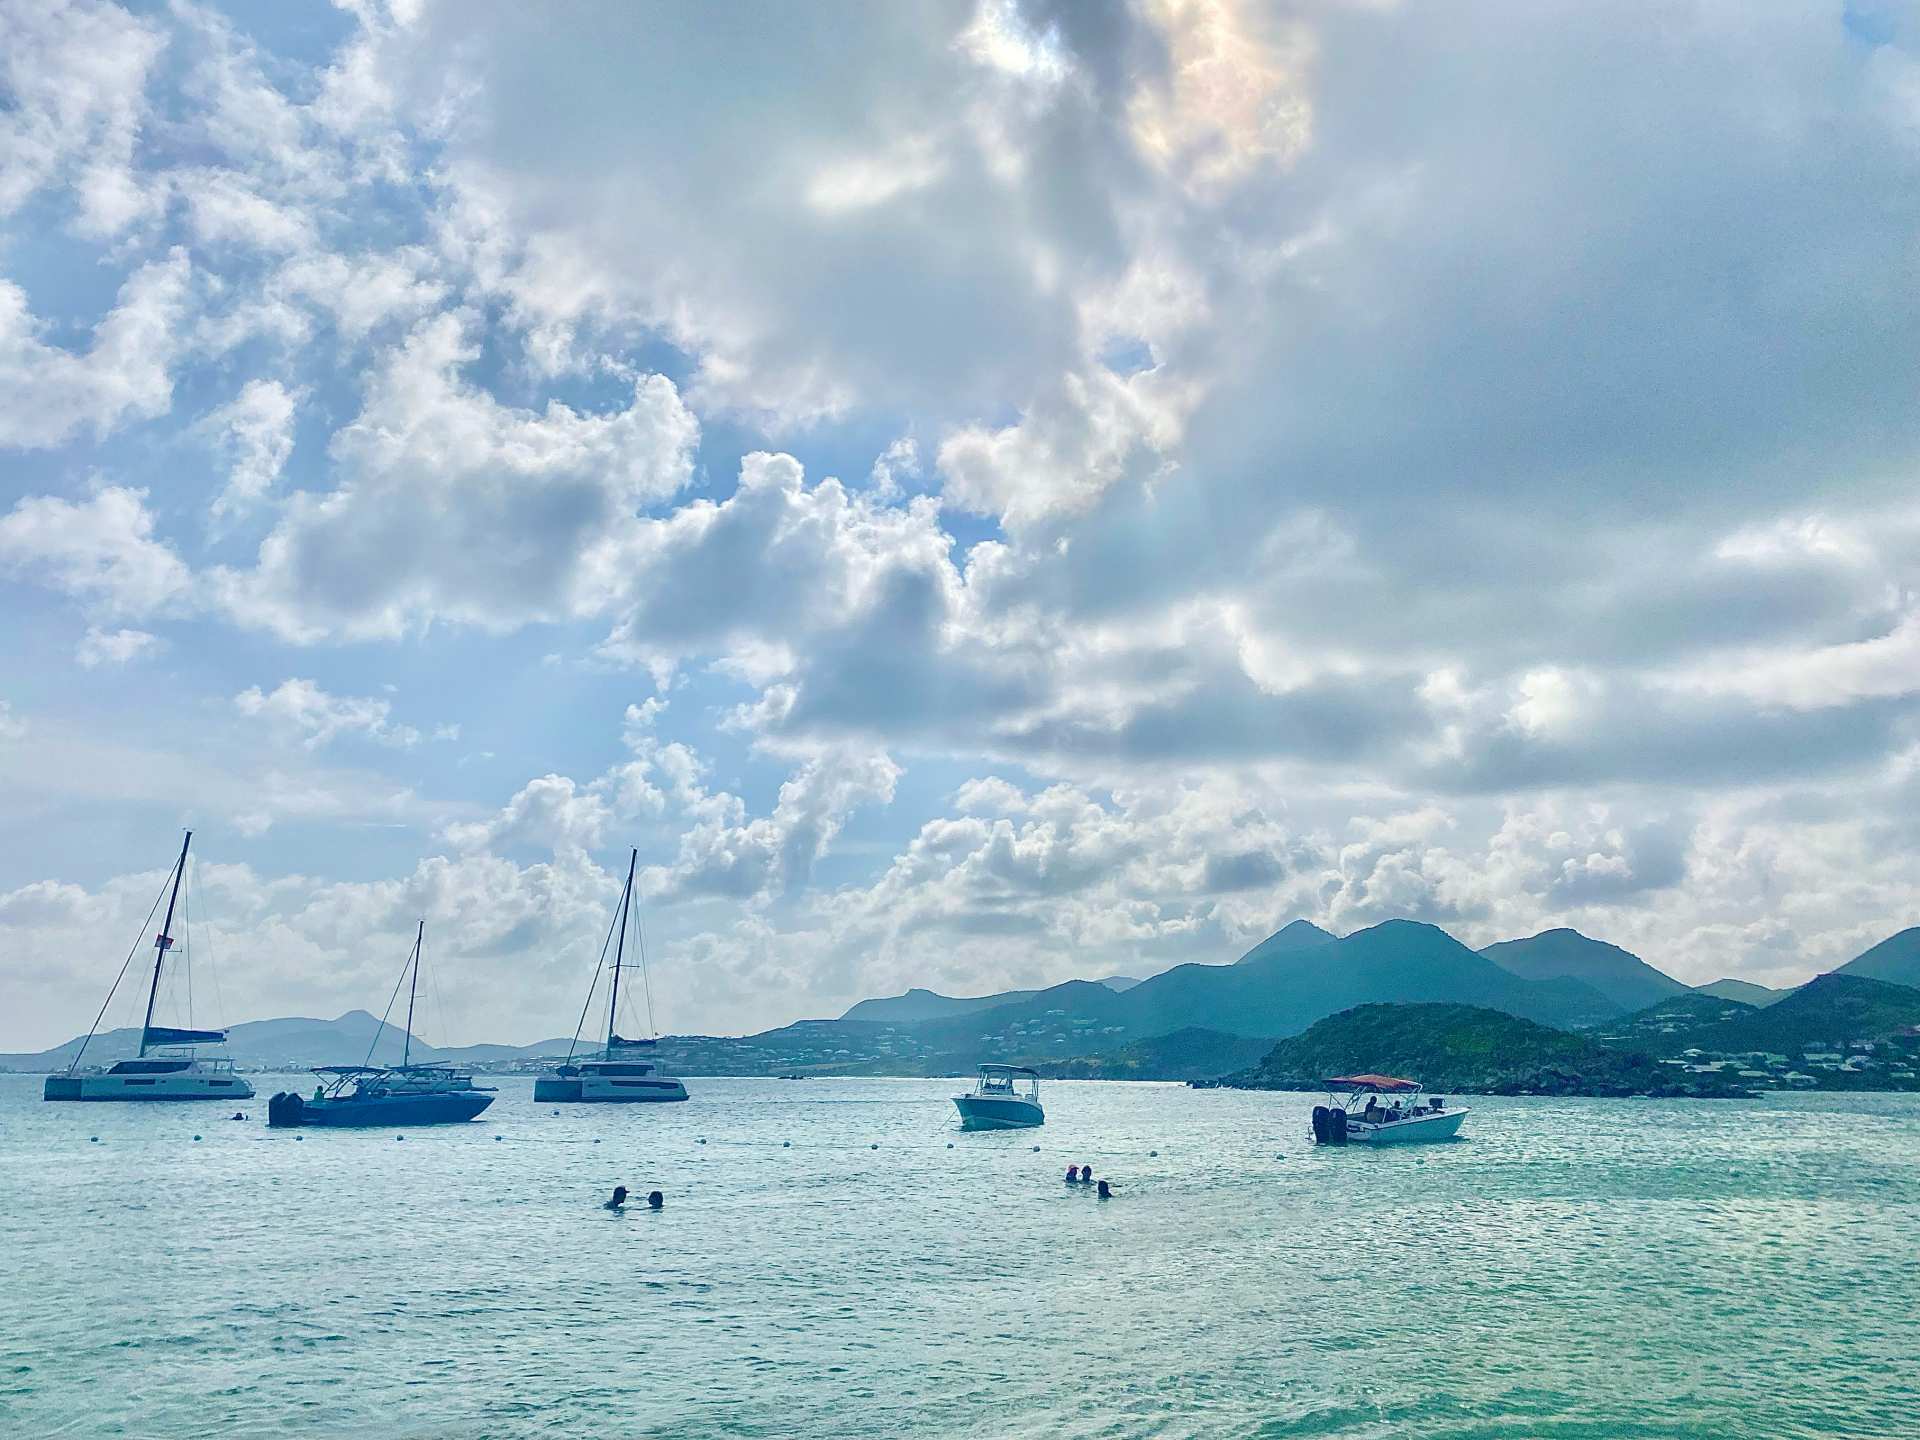 Saint Martin | The view from Pinel Island